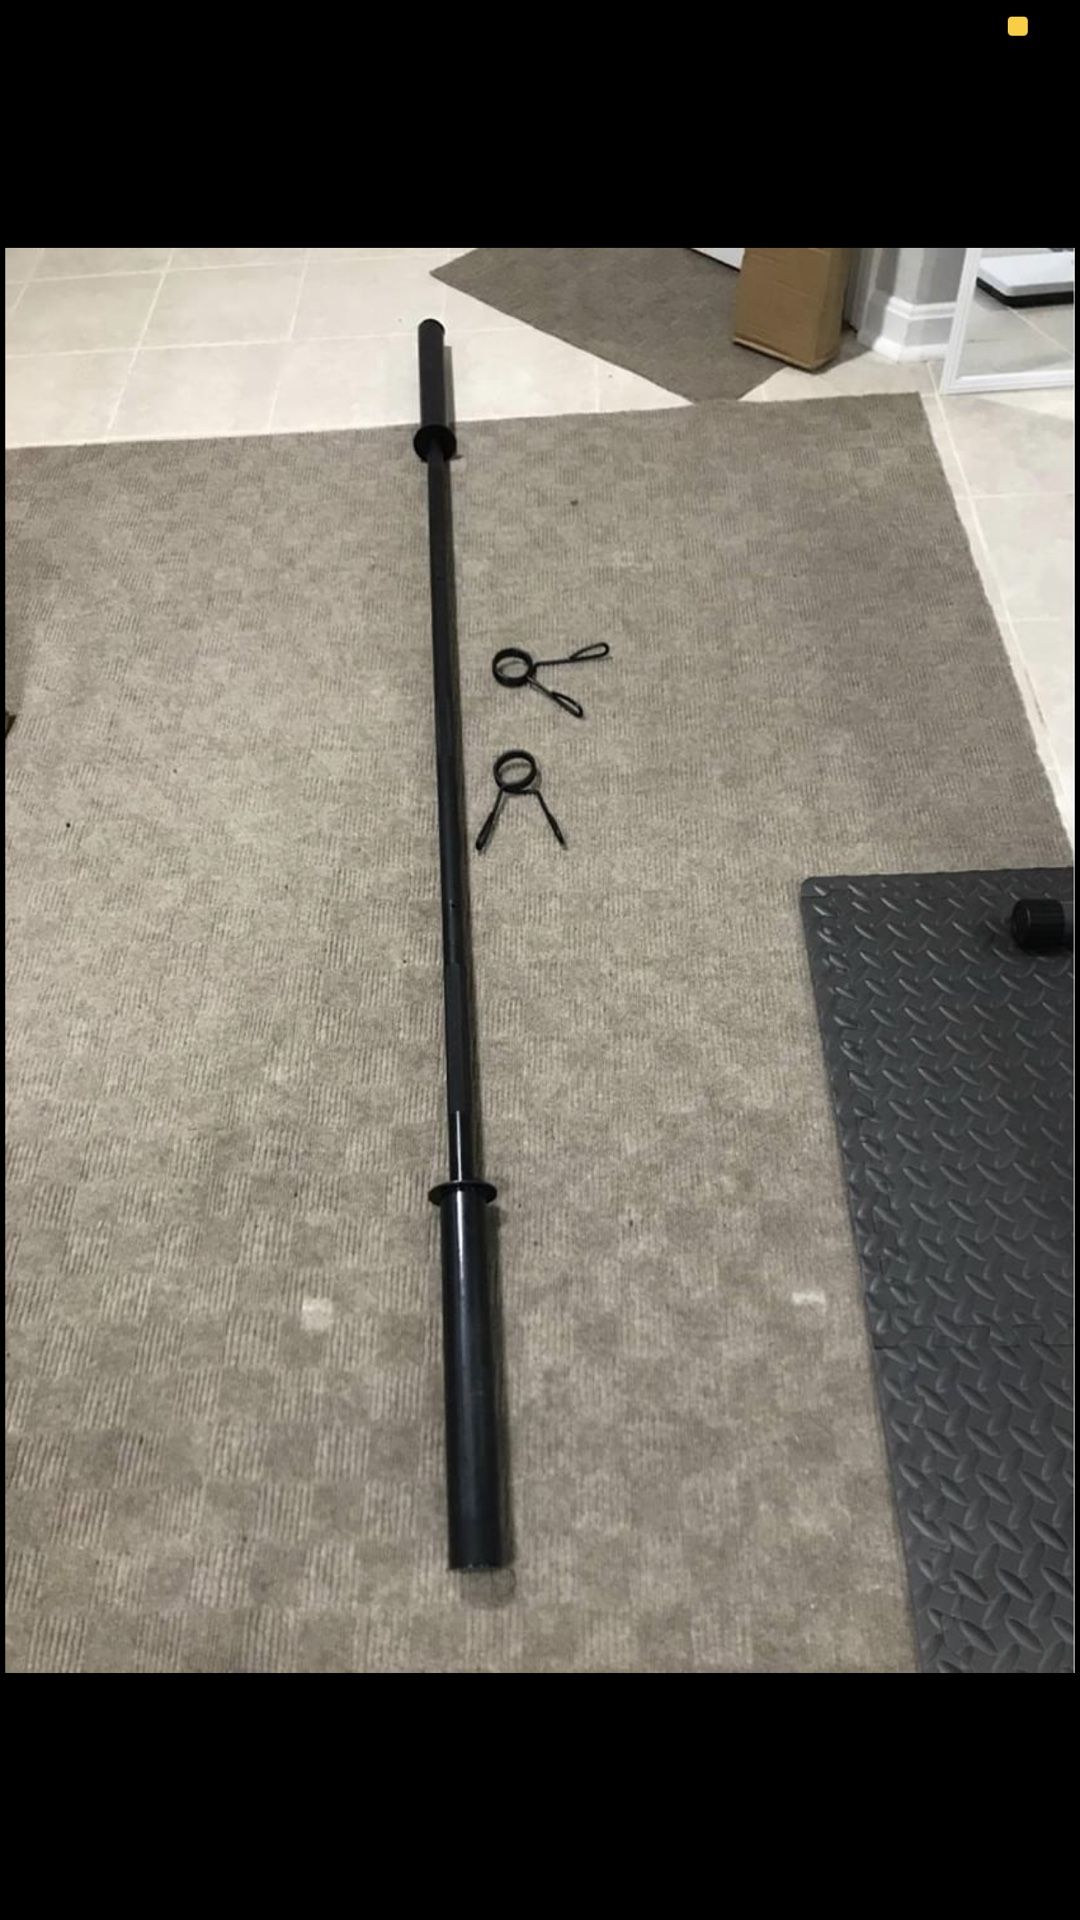 7-Foot Olympic Barbell for 2” Black Olympic-Sized Weight Plates with 2 clips lock